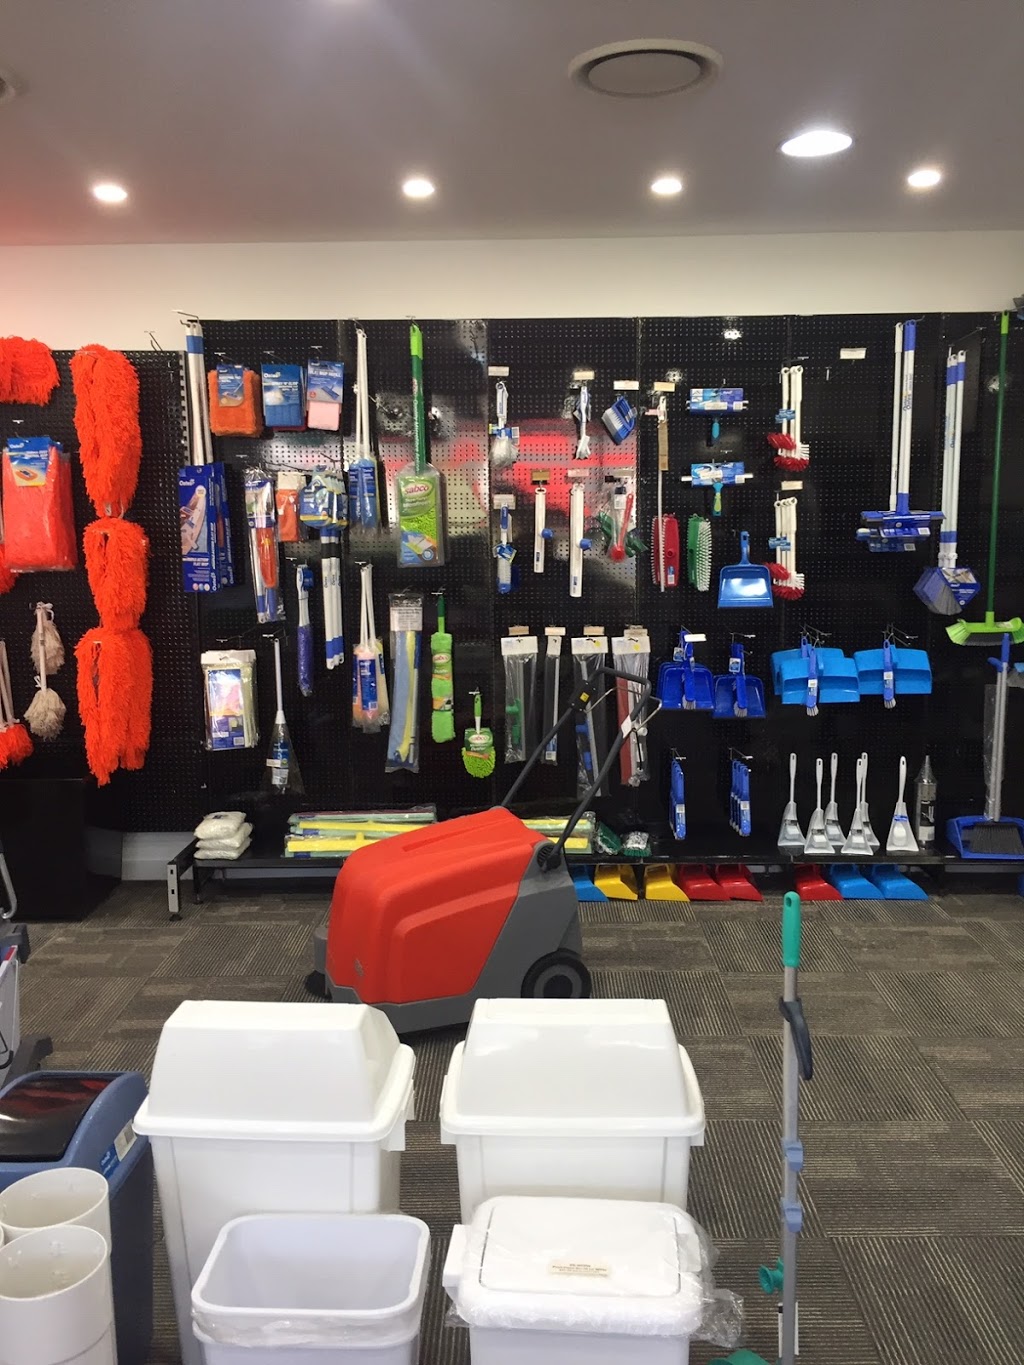 Asset Cleaning Supplies | store | 3/19 Balook Dr, Beresfield NSW 2322, Australia | 0249623622 OR +61 2 4962 3622